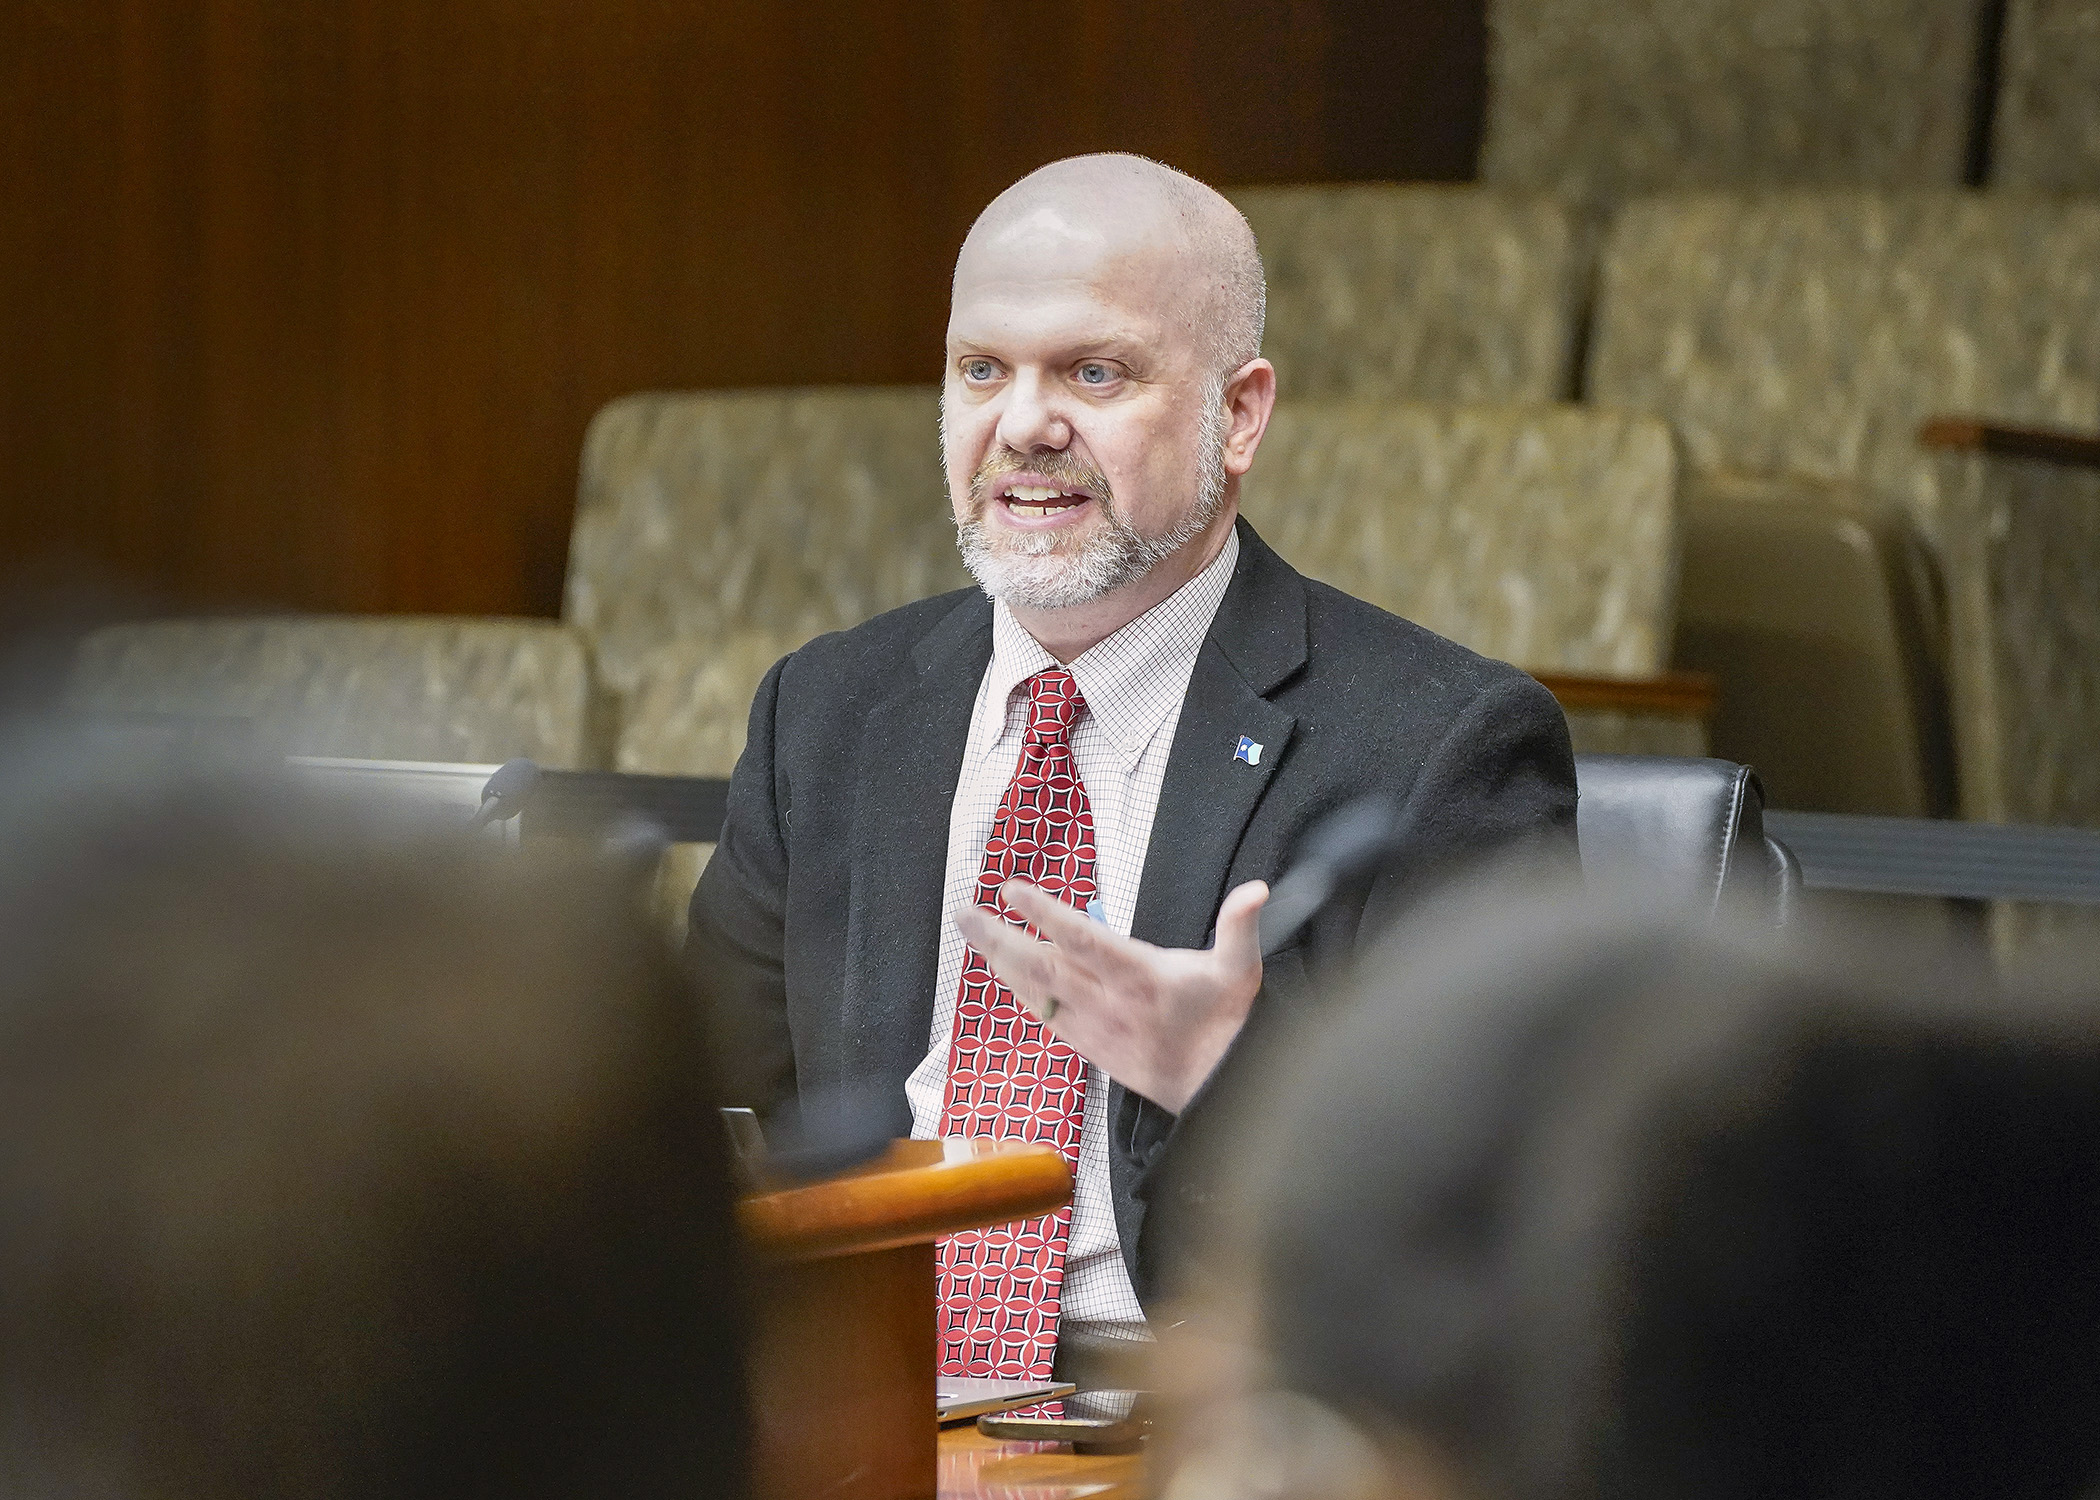 Rep. Mike Freiberg presents the elections and campaign finance supplemental budget bill to the House Elections Finance and Policy Committee April 17. (Photo by Andrew VonBank)